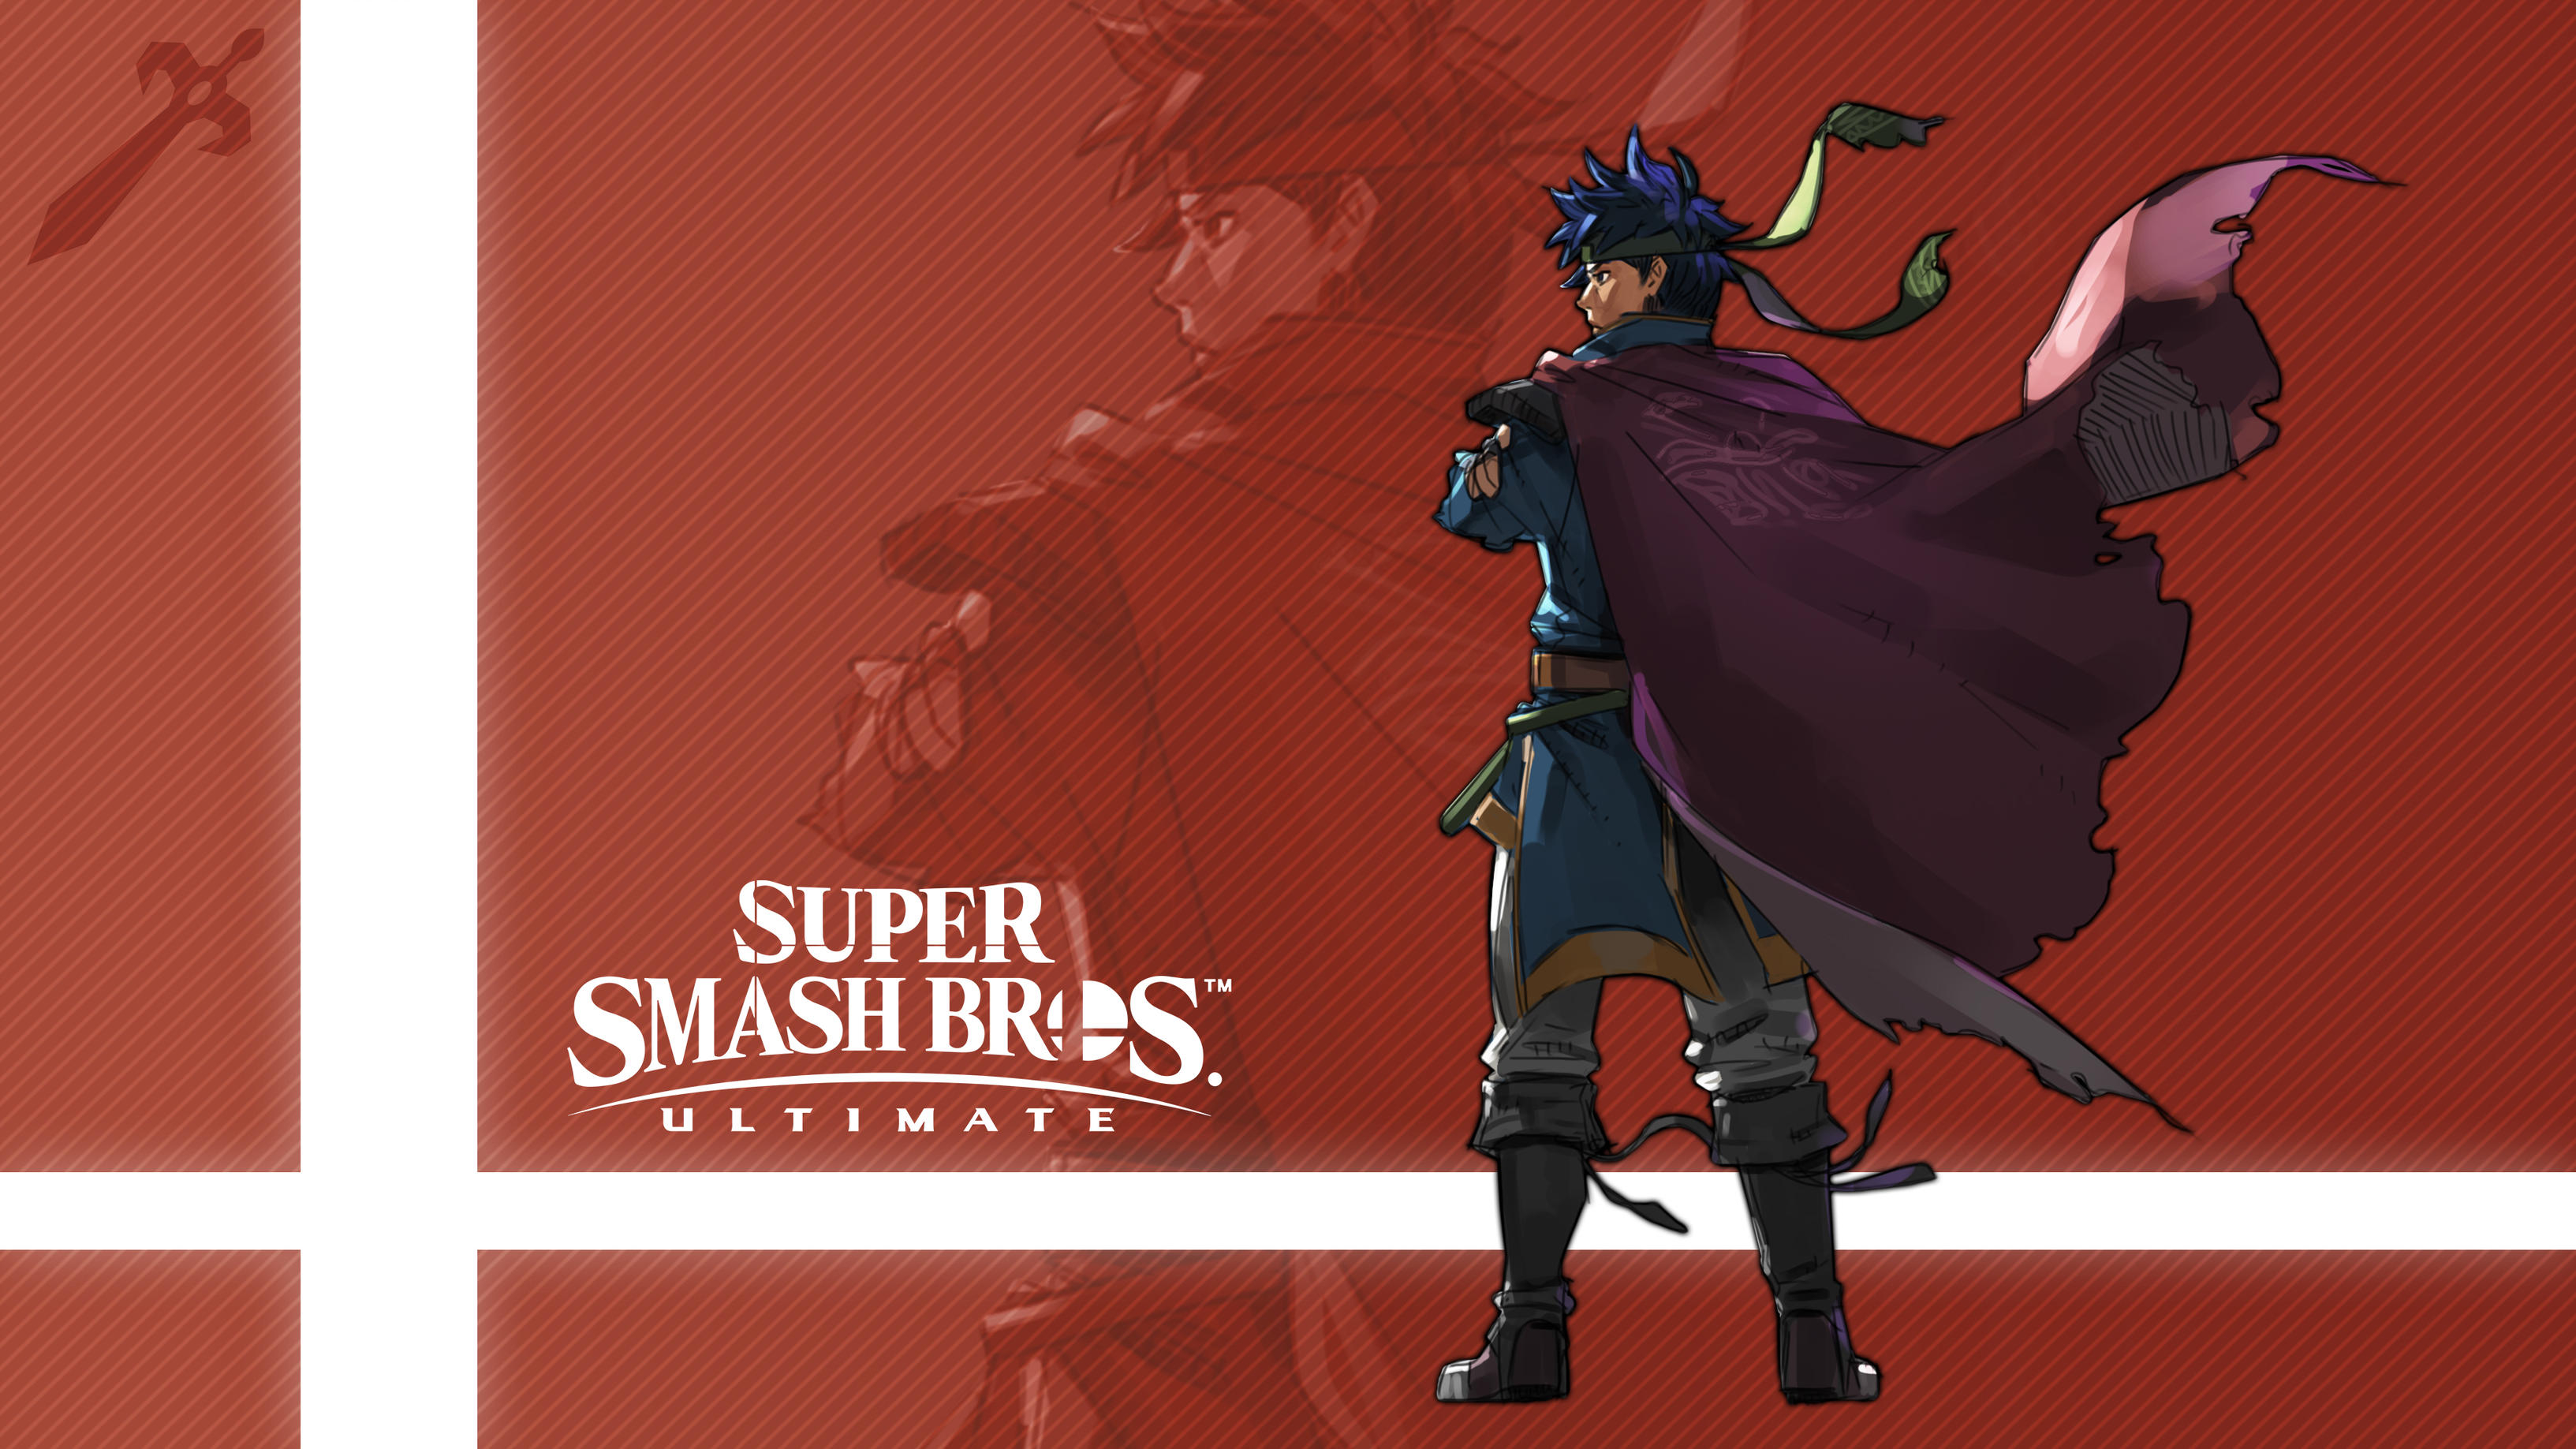 3266x1837 270+ Super Smash Bros. Ultimate HD Wallpapers and Backgrounds